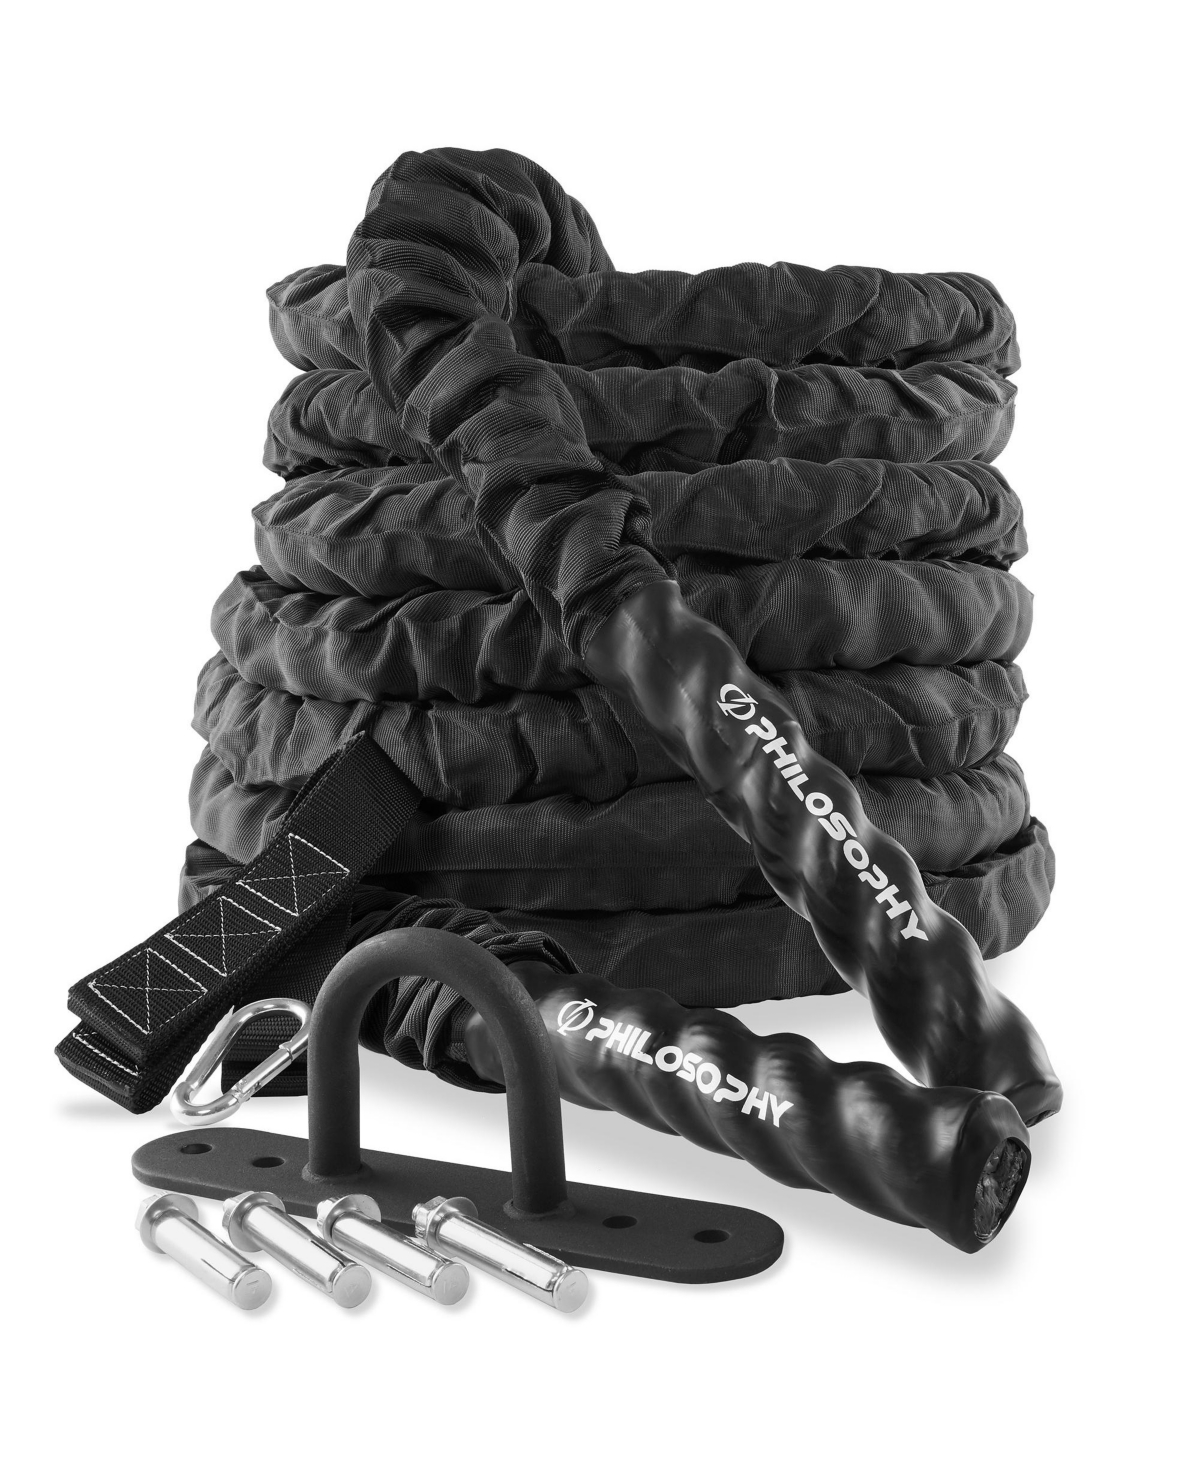 50 Foot Exercise Battle Rope 2 Inch Diameter with Cover and Anchor Kit - Black